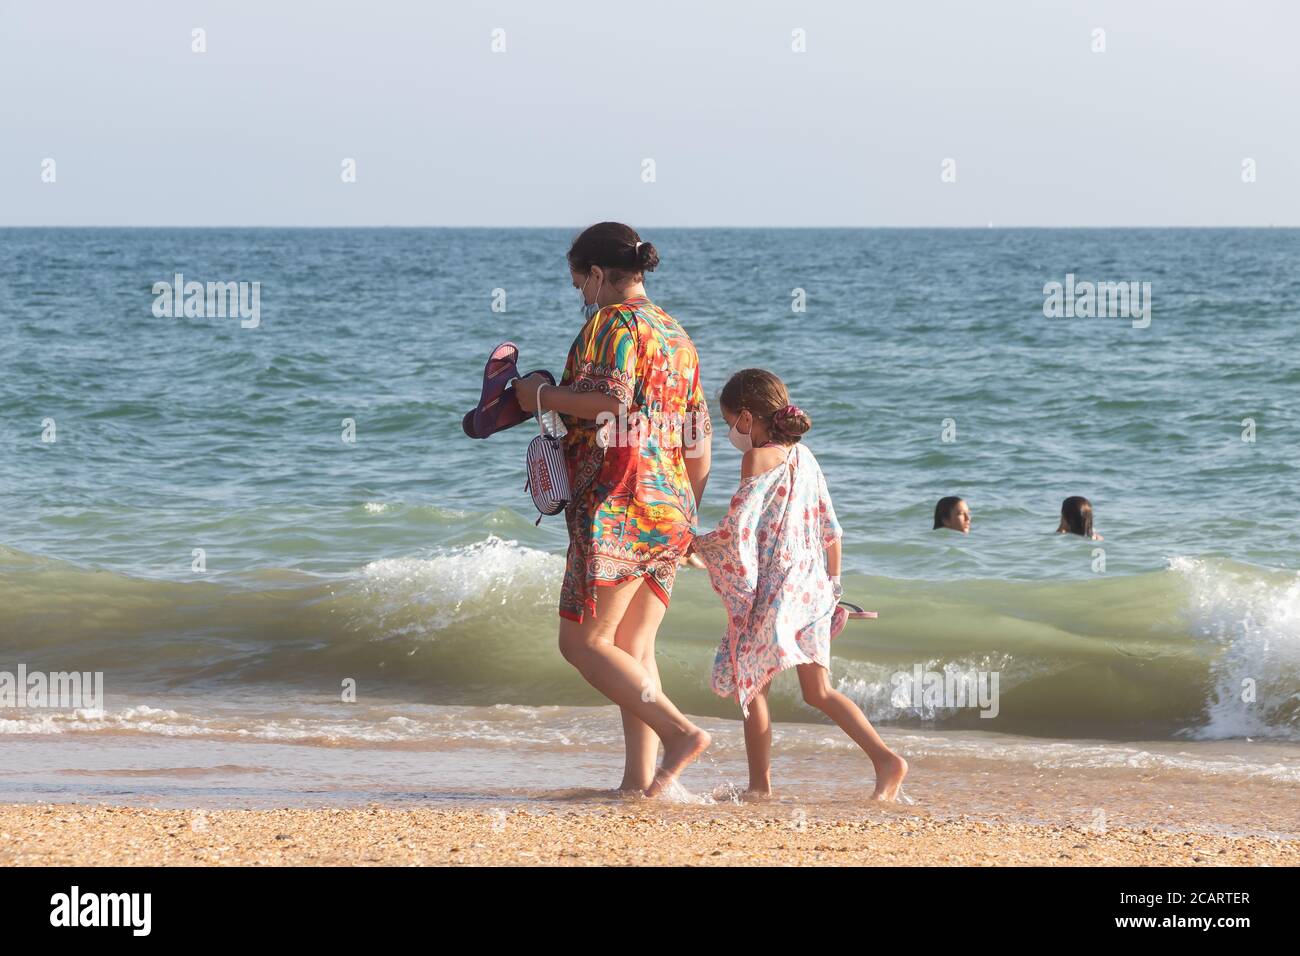 Punta Umbria, Huelva, Spain - August 7, 2020: Mother and daughter are walking by the beach wearing protective or medical face masks. New normal in Spa Stock Photo